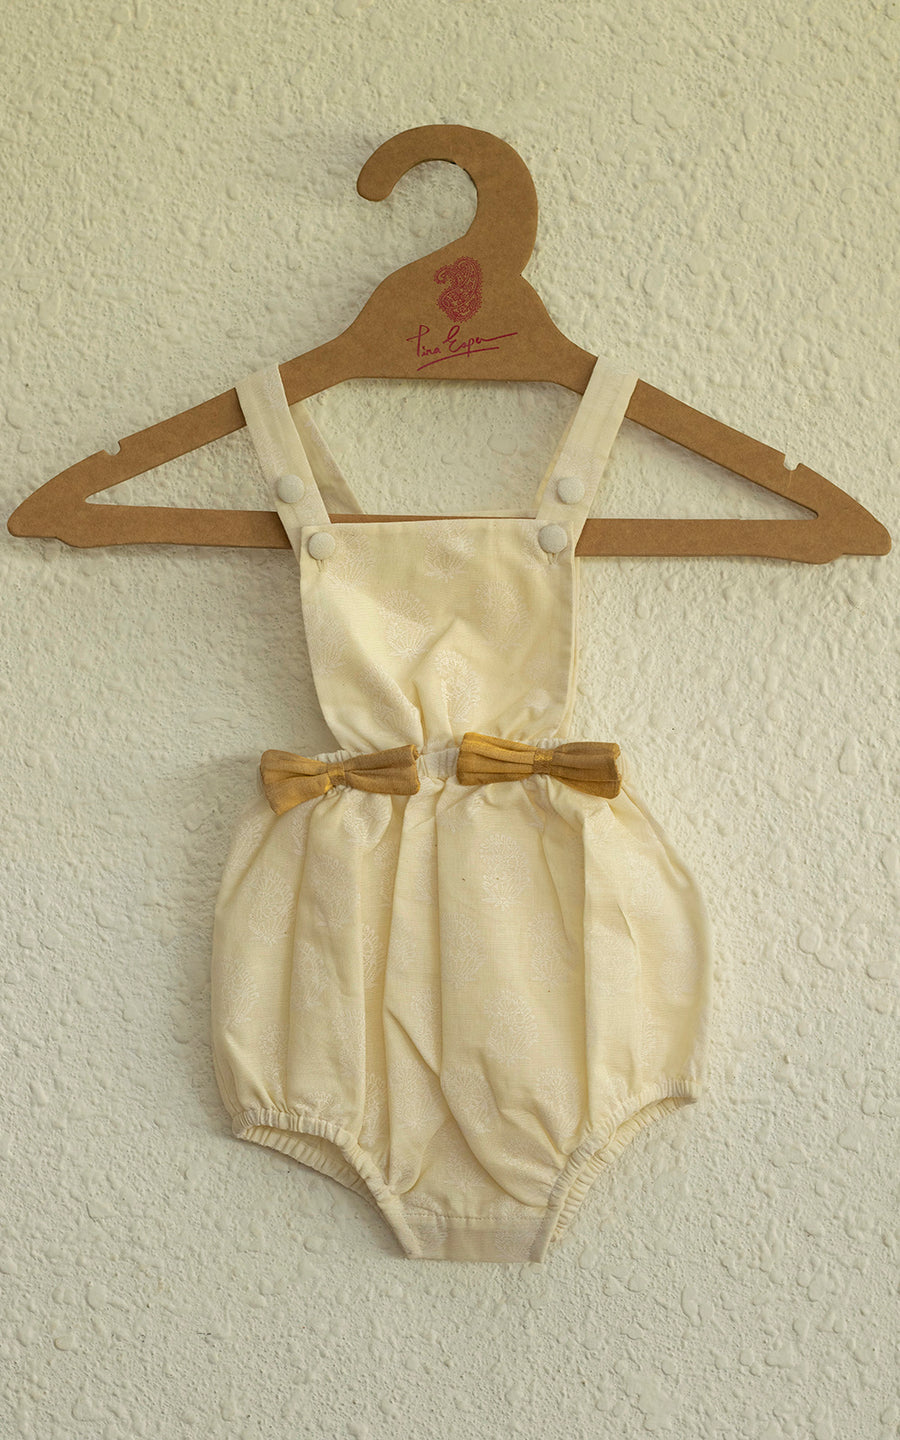 EASY BREEZY HAND BLOCK PRINTED ROMPER IN COTTON KASAVU WITH BOWS AT THE FRONT